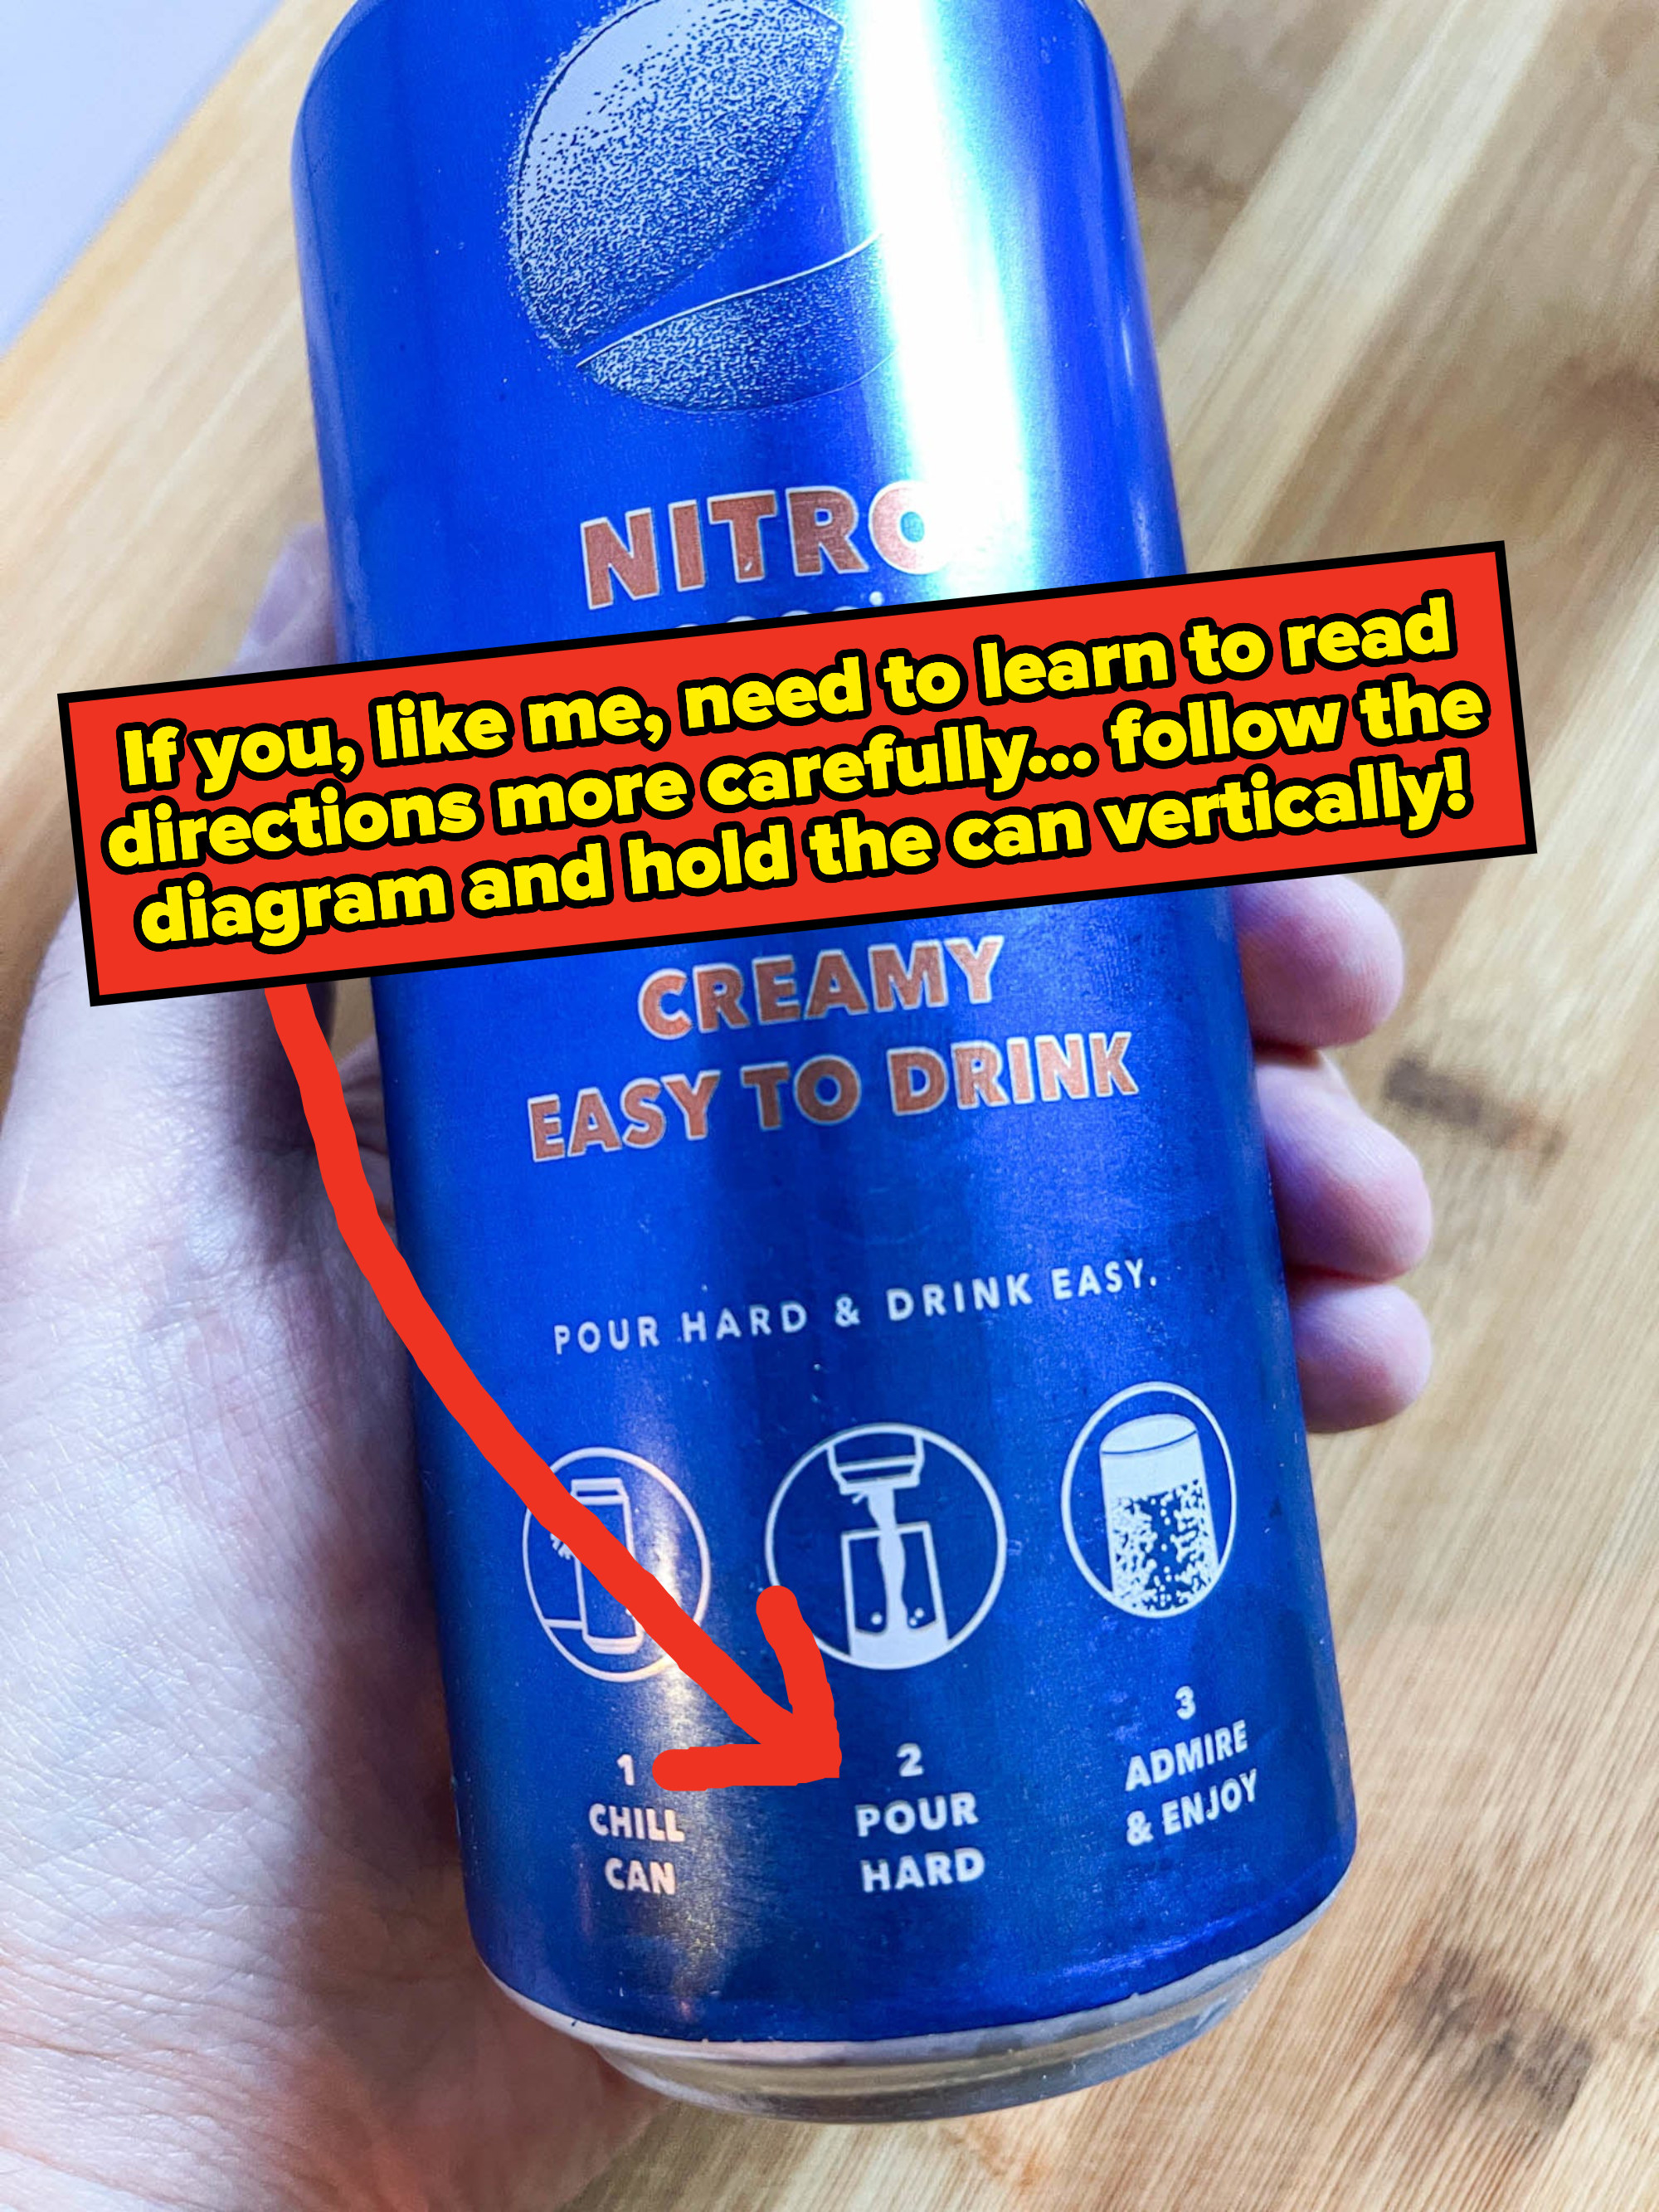 Arrow pointing to a direction on the can instructing people to hold can vertically while pouring hard